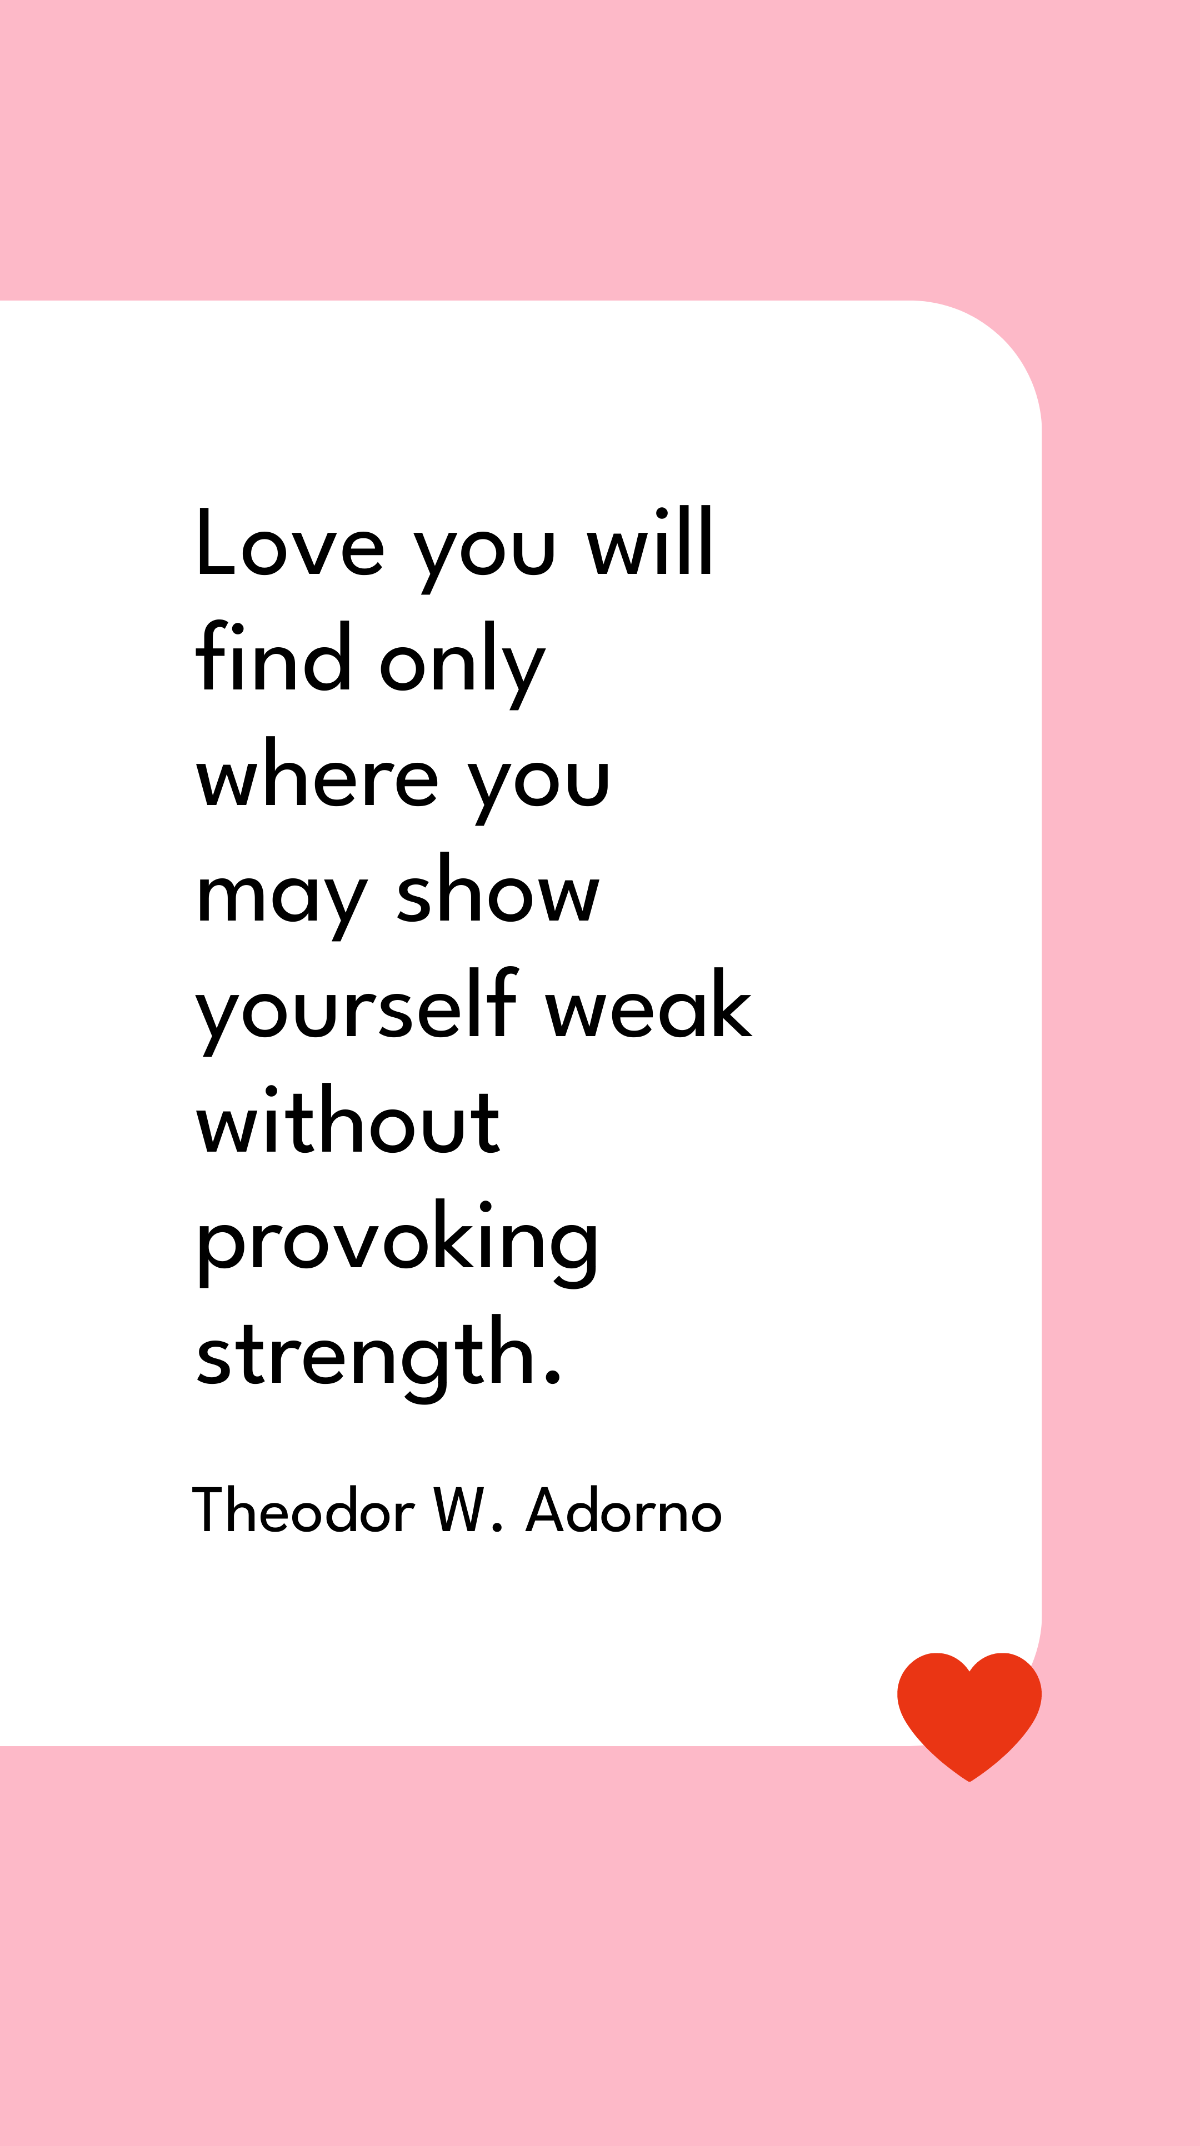 Theodor W. Adorno - Love you will find only where you may show yourself weak without provoking strength. Template